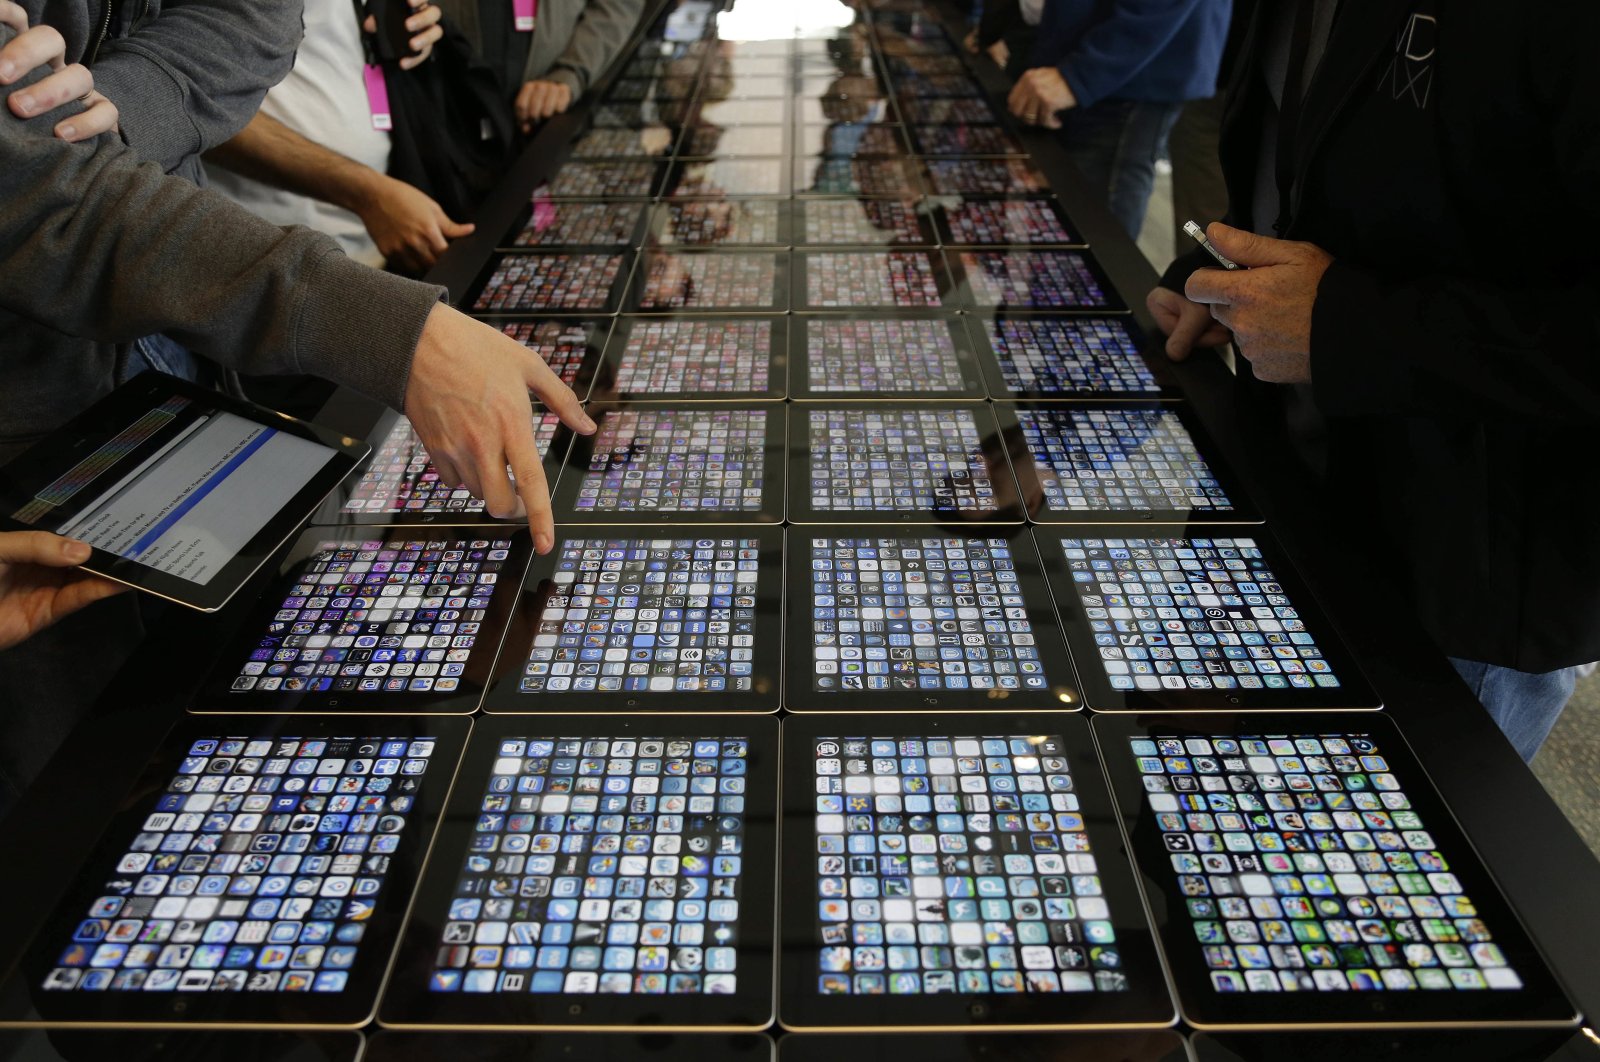 Developers look over new apps being displayed on iPads at the Apple Worldwide Developers Conference in San Francisco, California, U.S., June 10, 2013. (AP Photo)